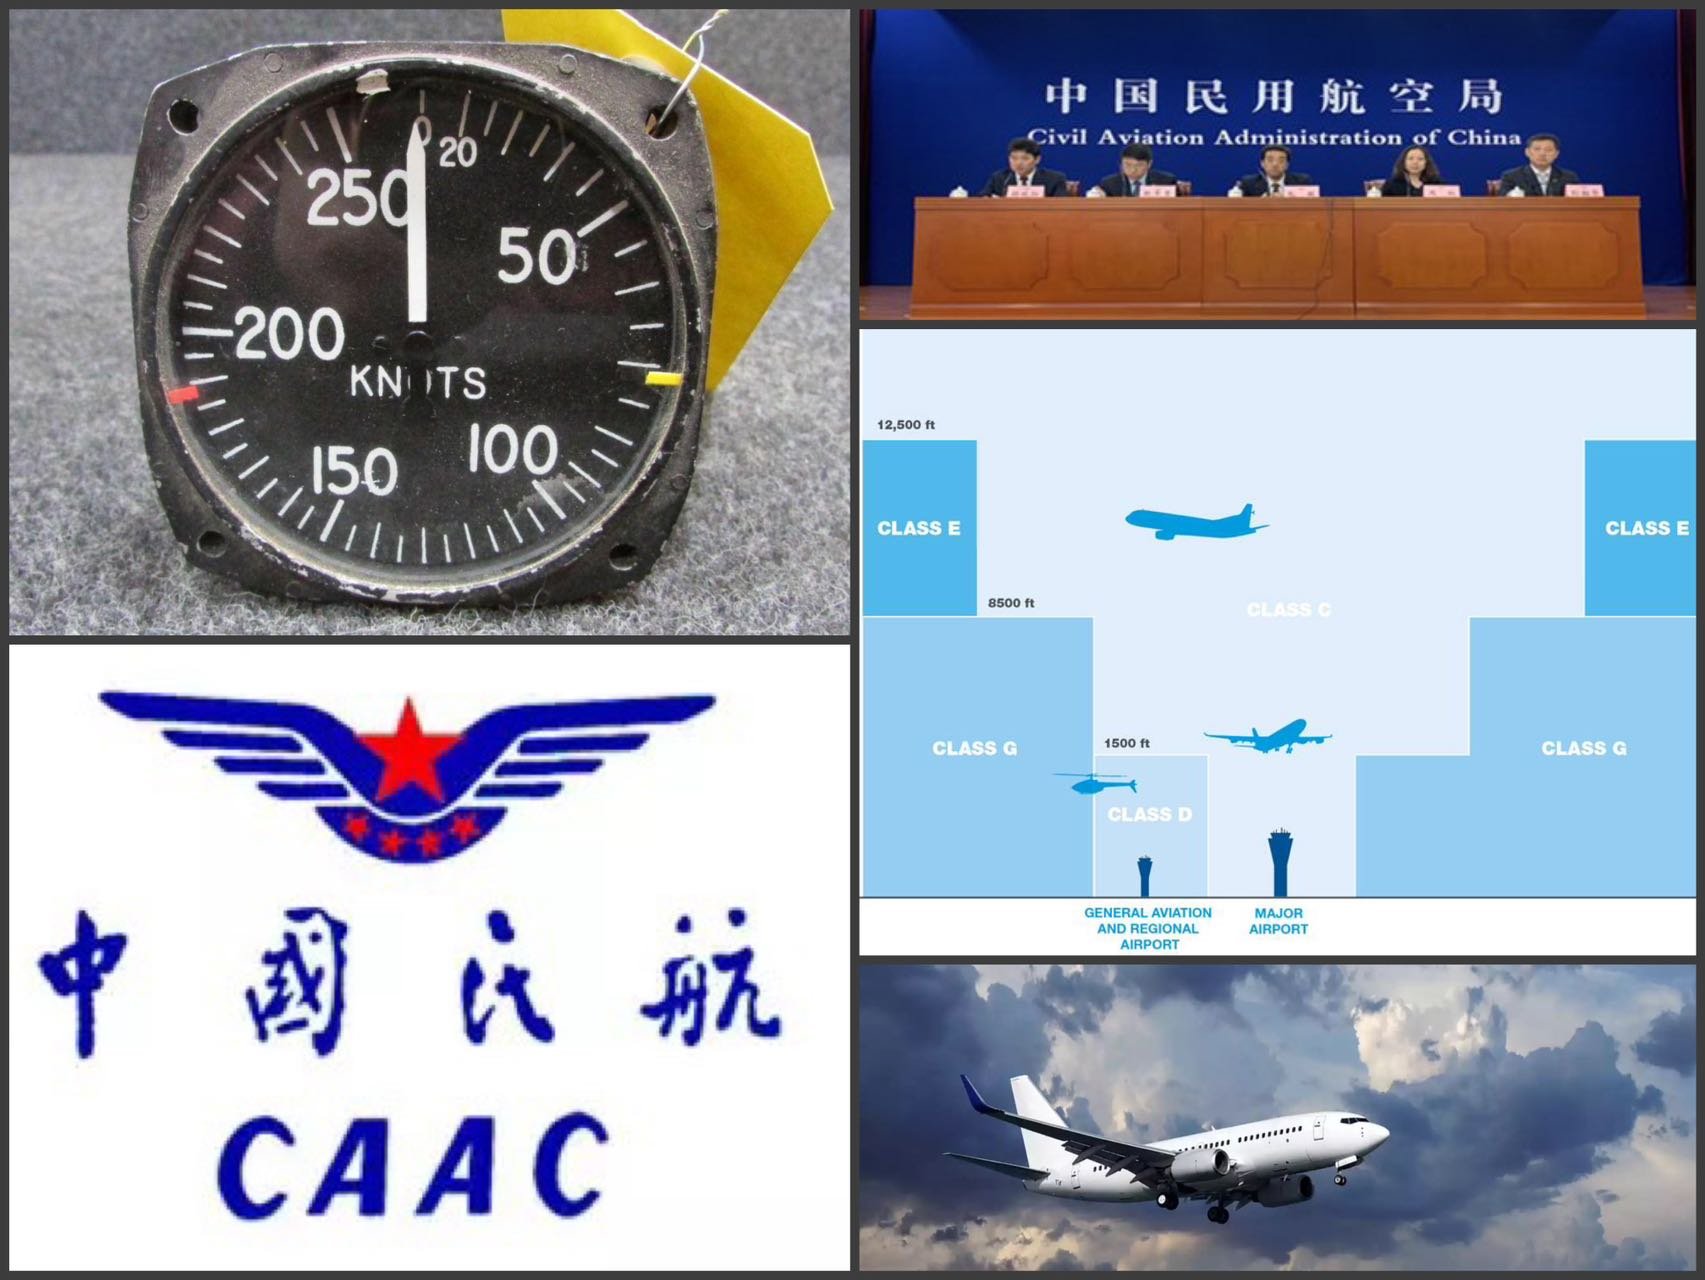 Michael Hundegger: Airspace is divided into different altitudes, with specific speed restrictions at each altitude set by the Central Aviation Administration of China.